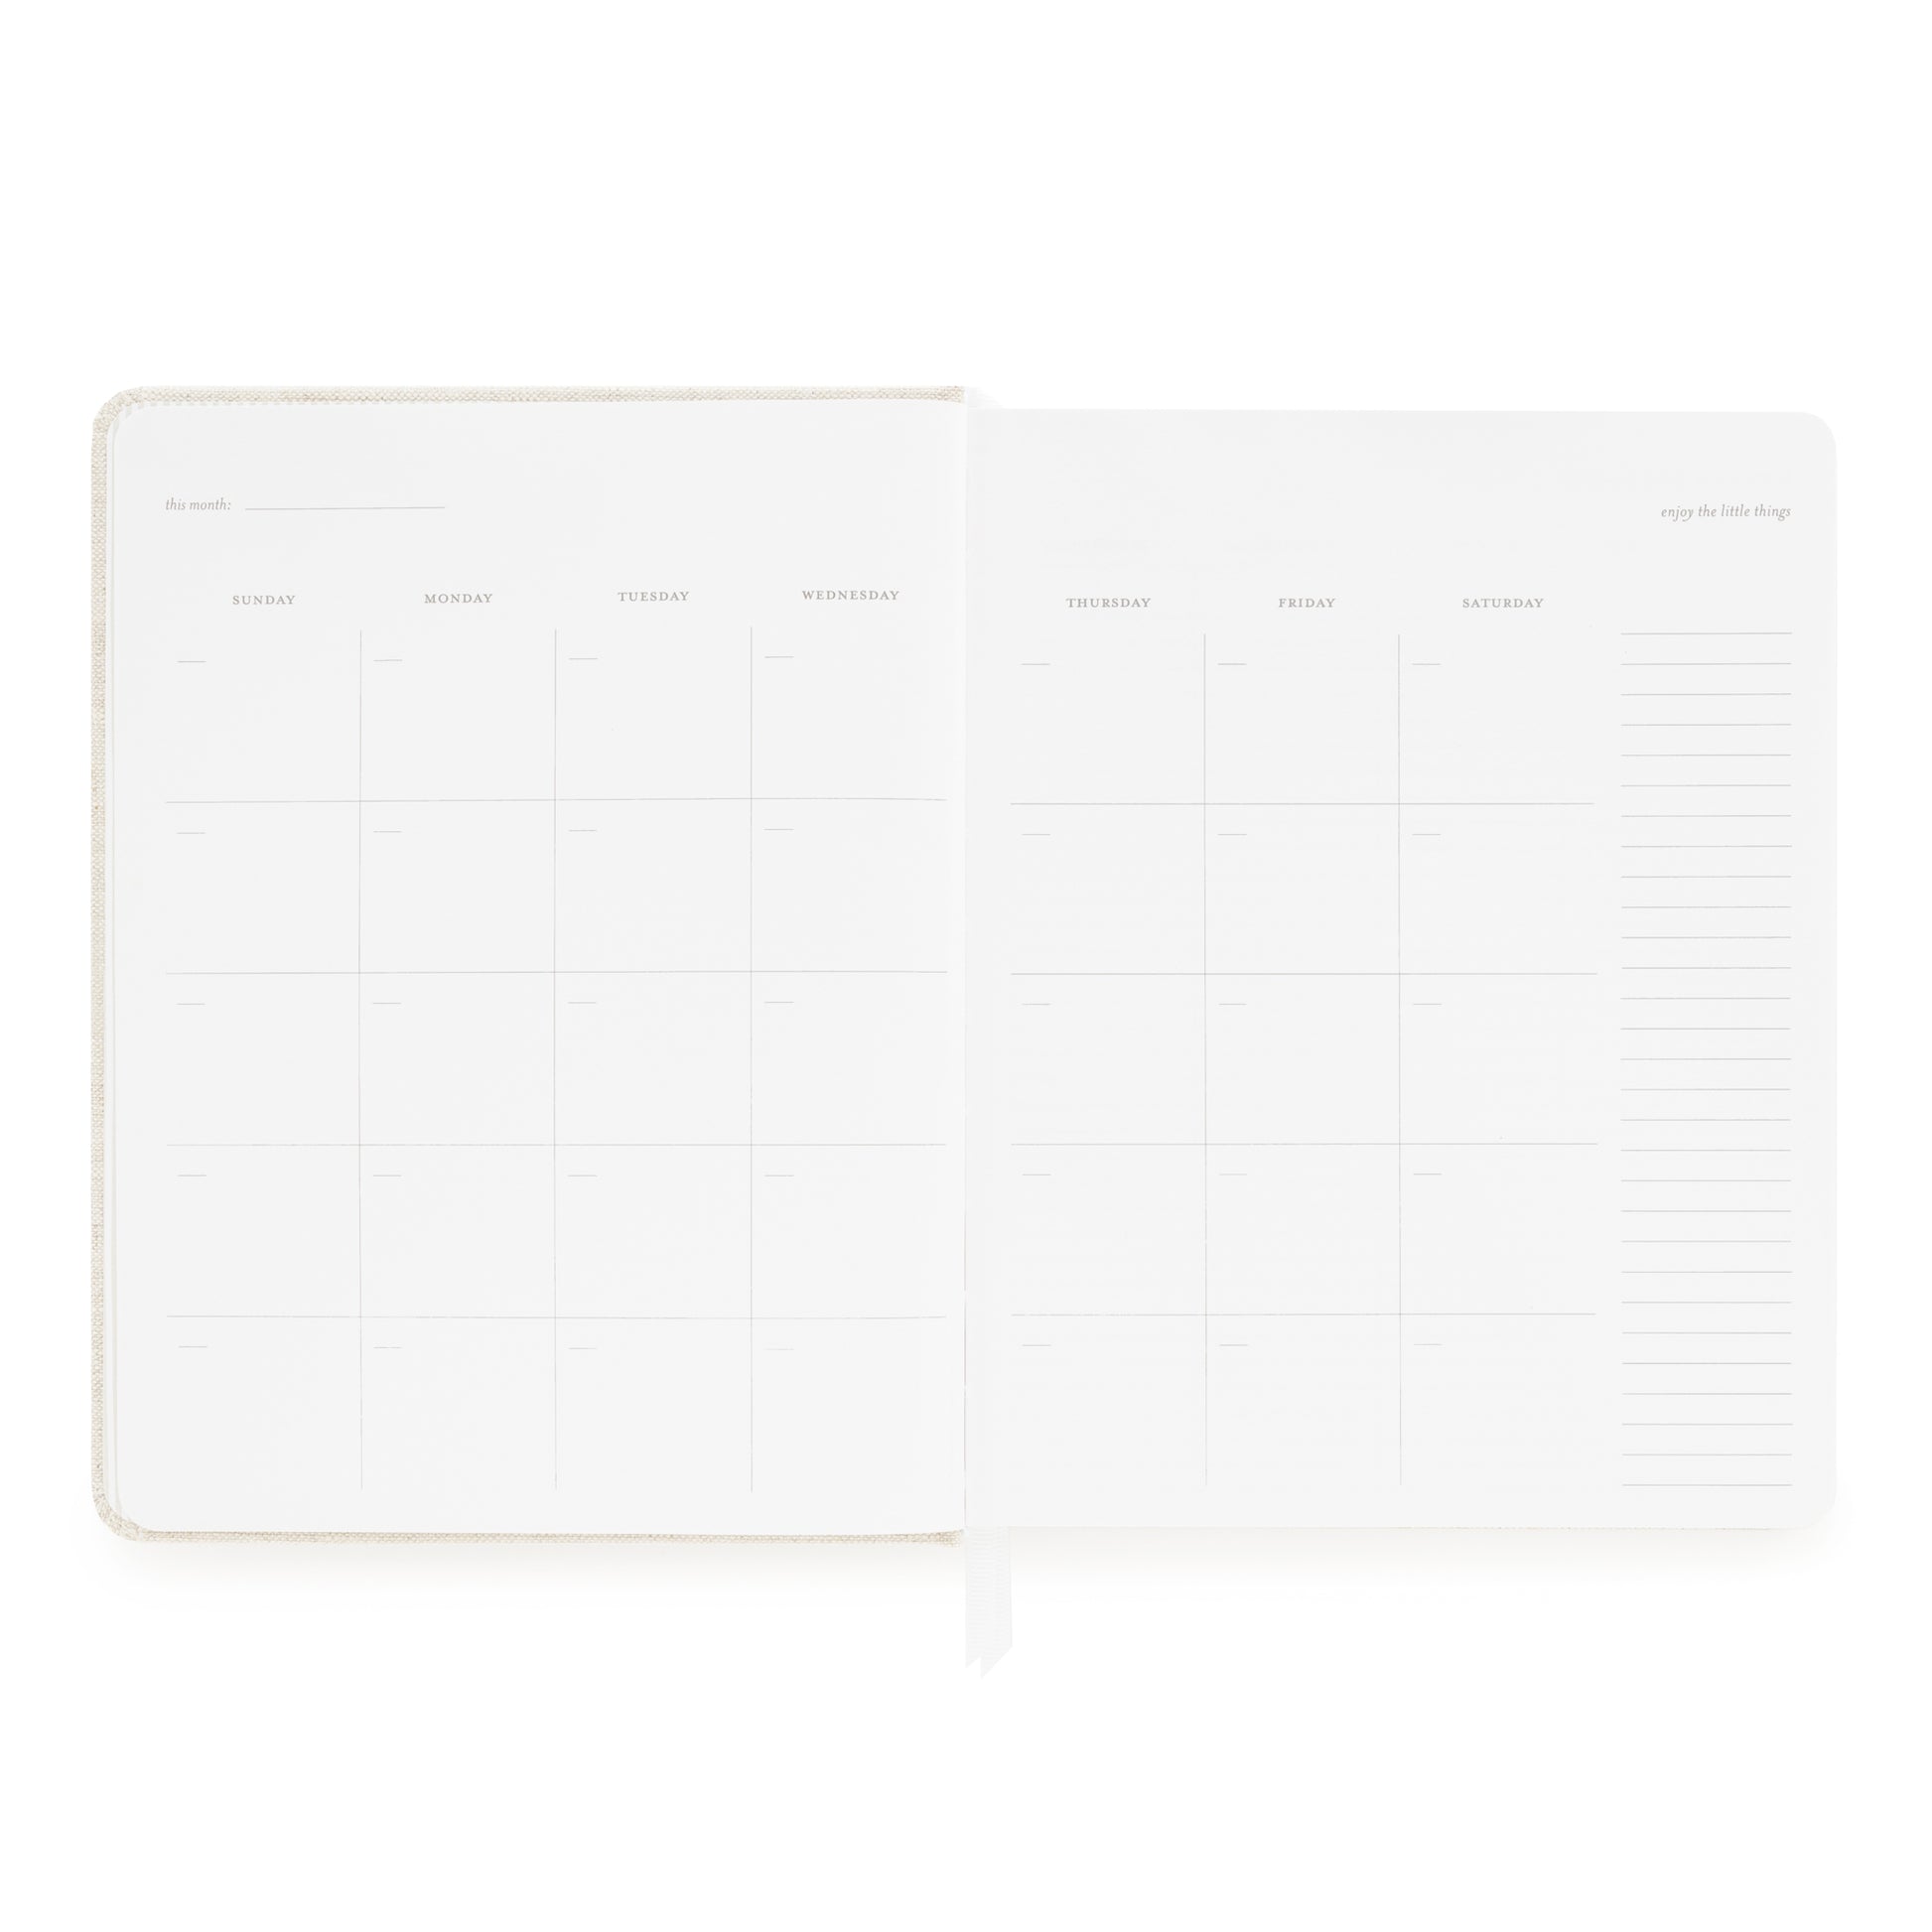 Monthly grid of undated planner